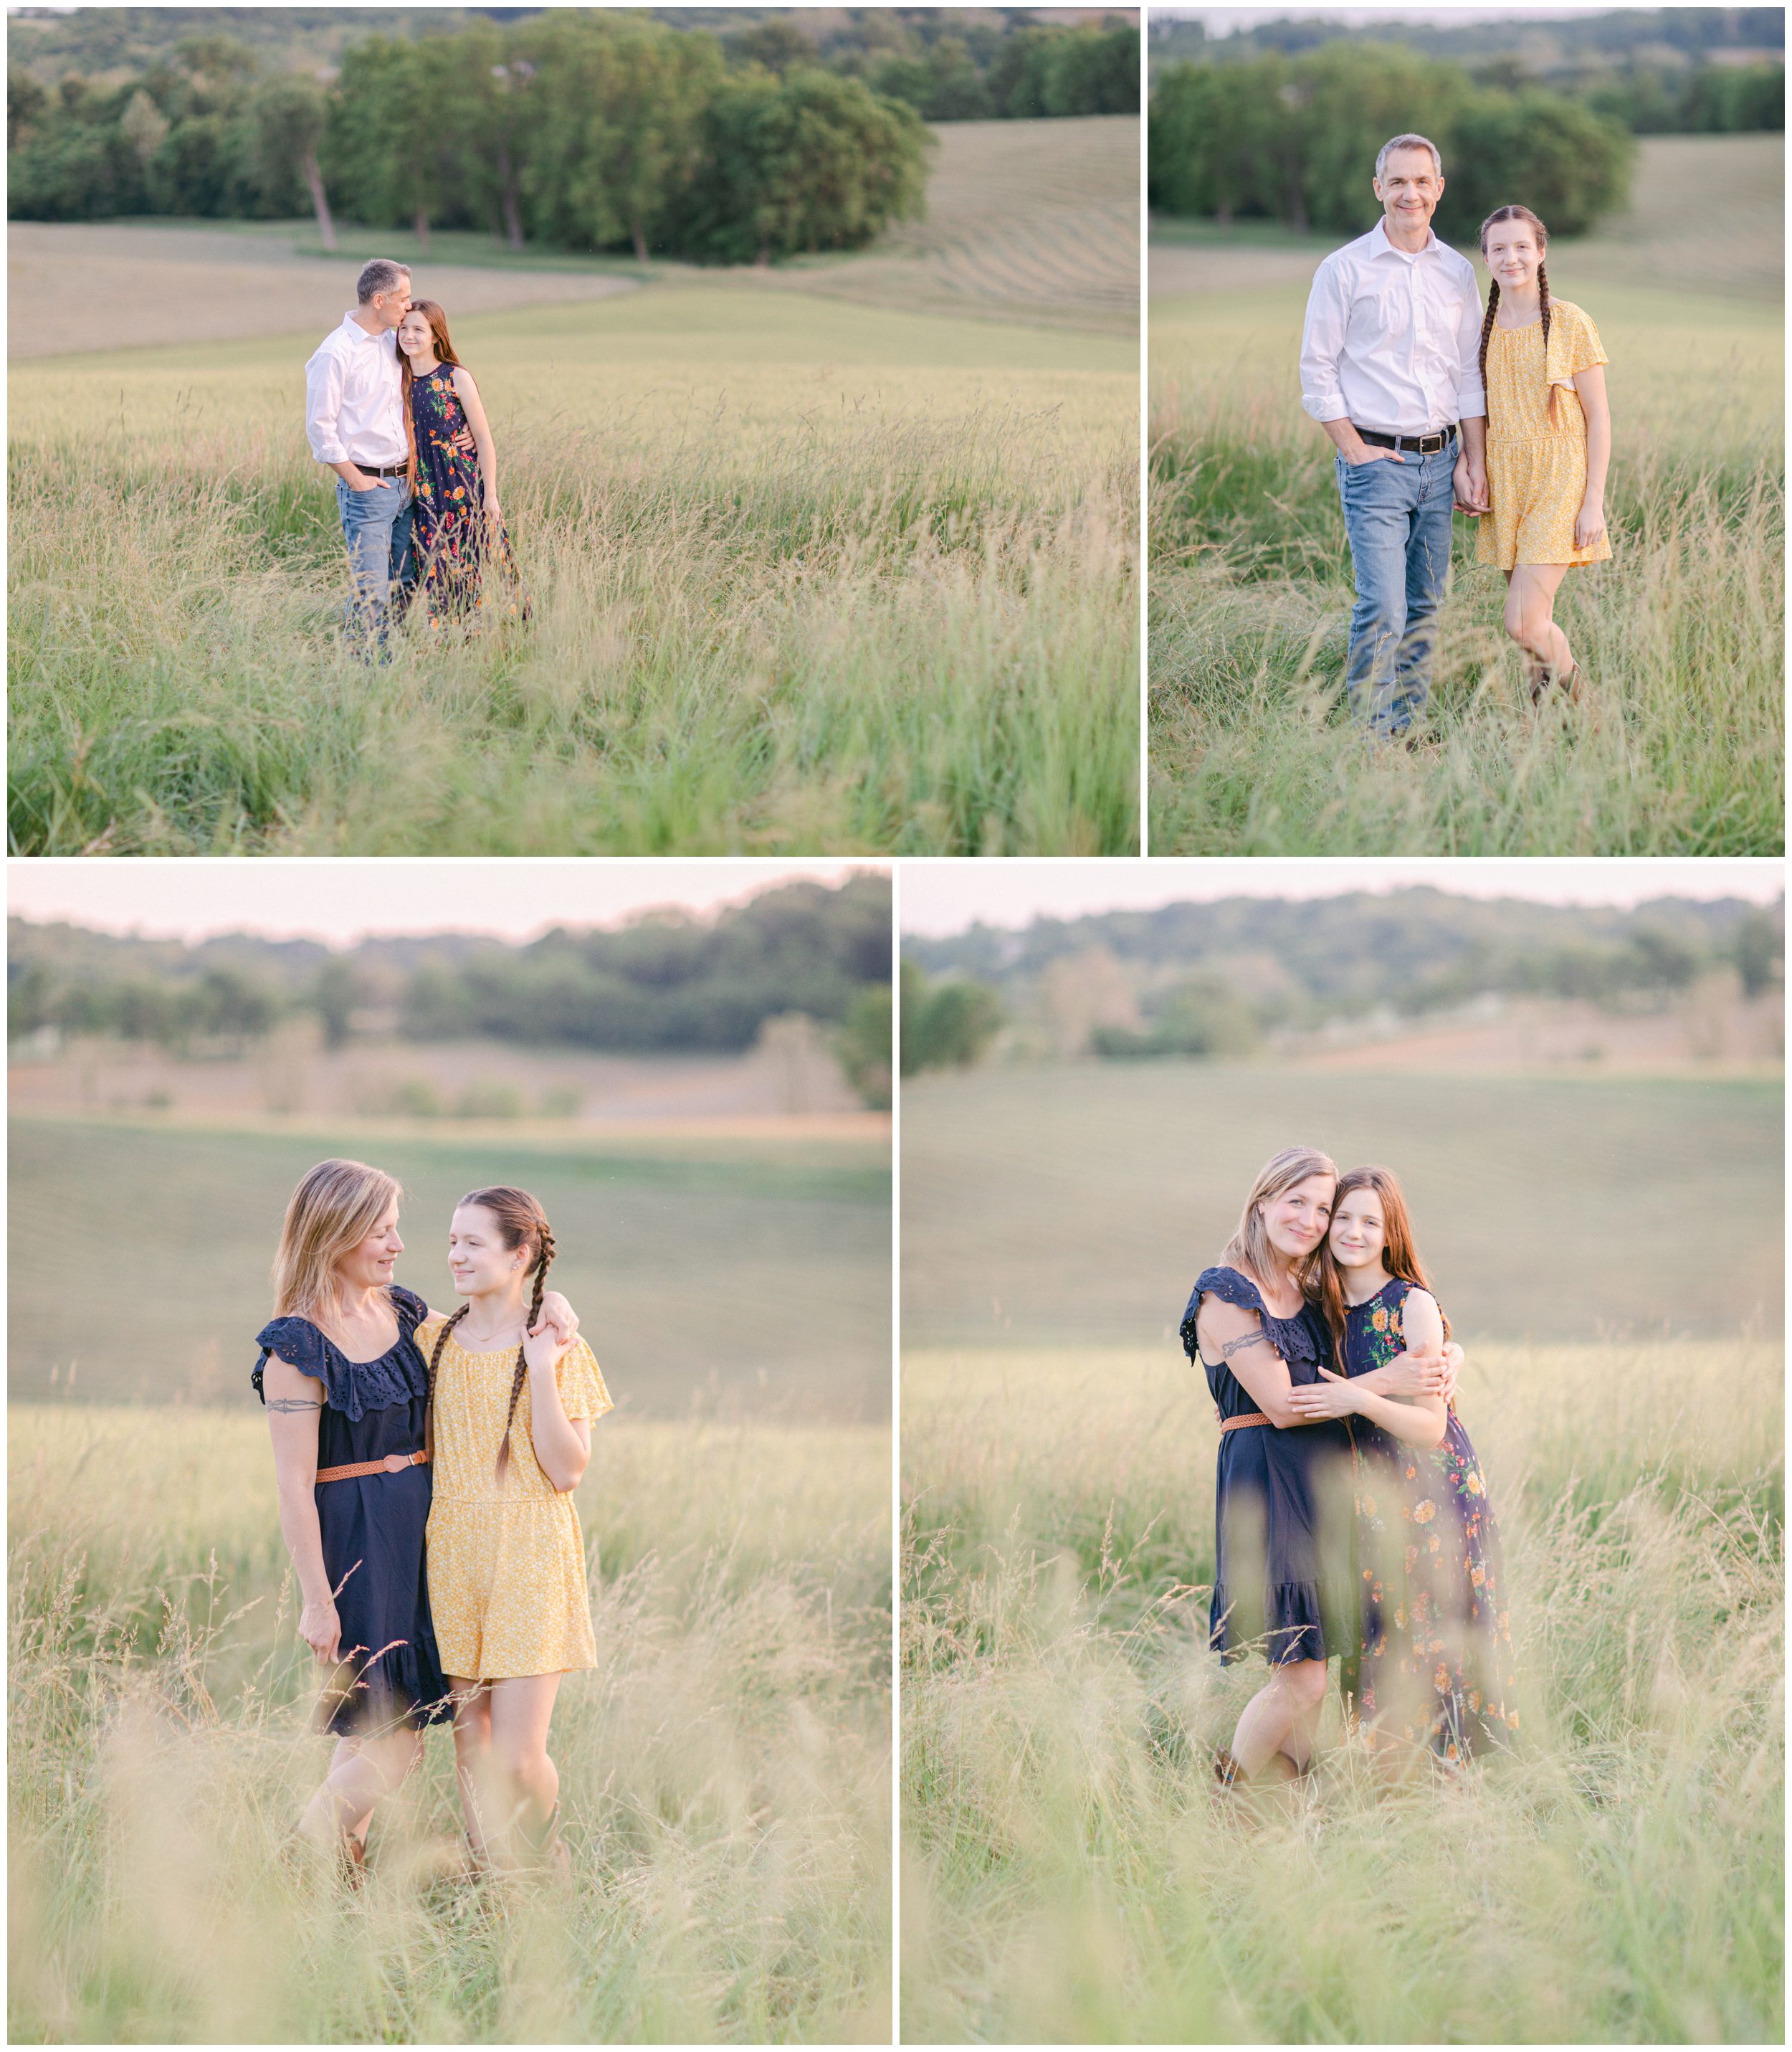 Spring outdoor family photography near St. Louis